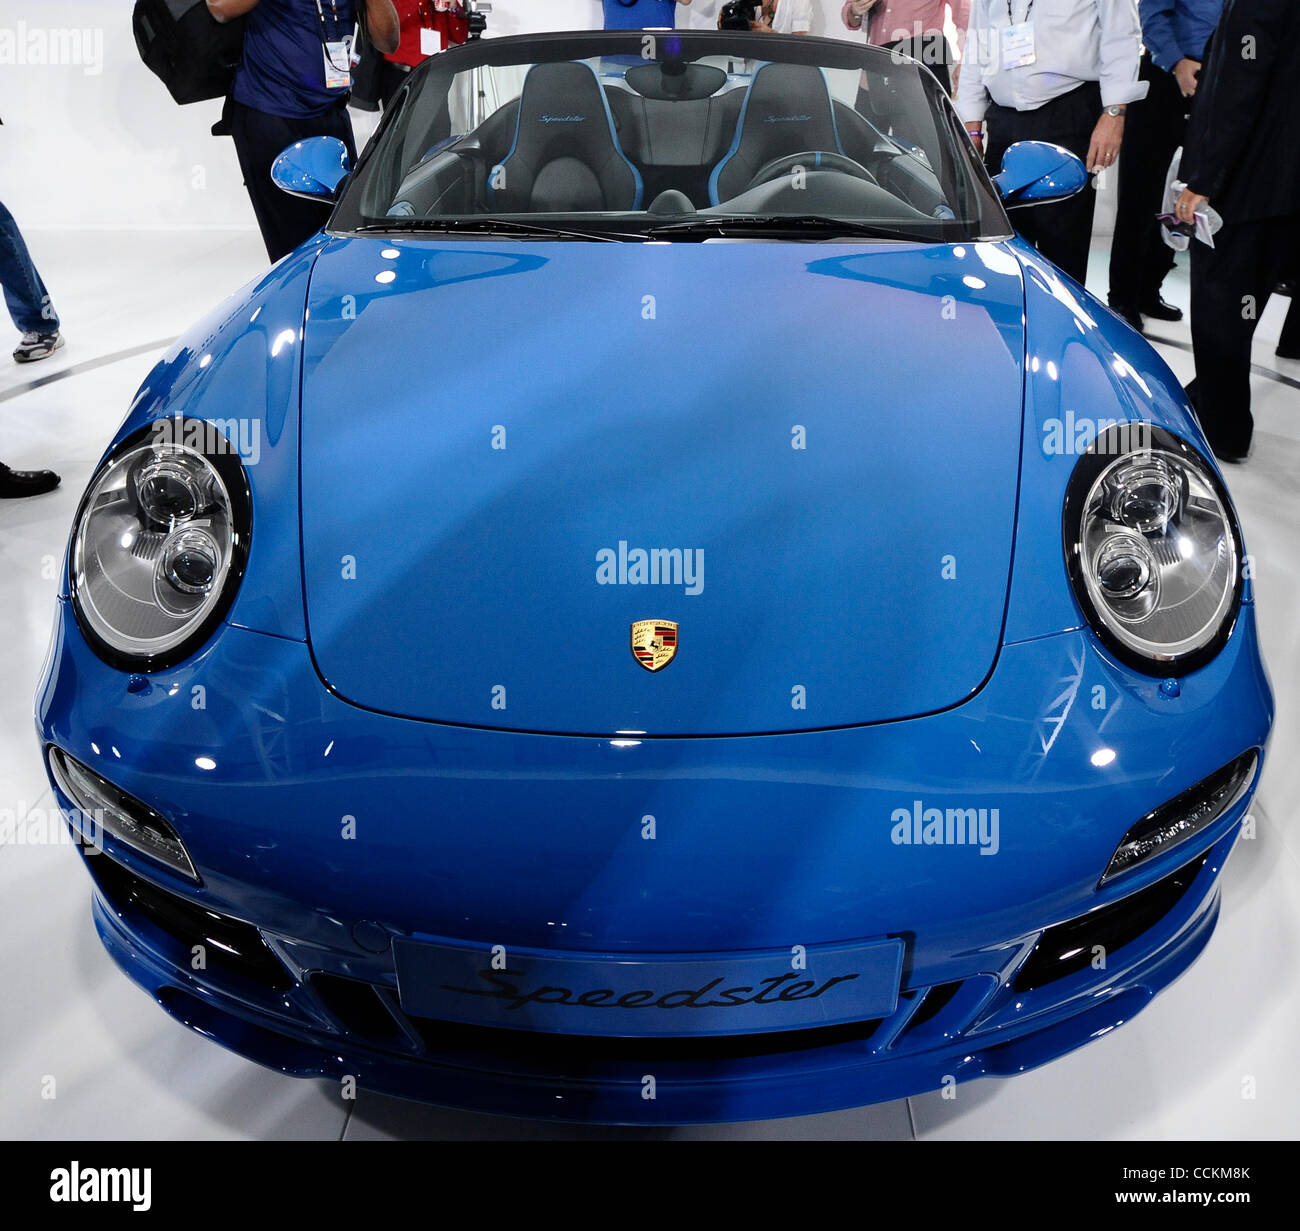 Nov 17, 2010 - Los Angeles, California, USA. Porsche shows their new Speedster car on display during the 2010 LA Auto show in Los Angeles  (Credit Image: © Gene Blevins/ZUMApress.com) Stock Photo